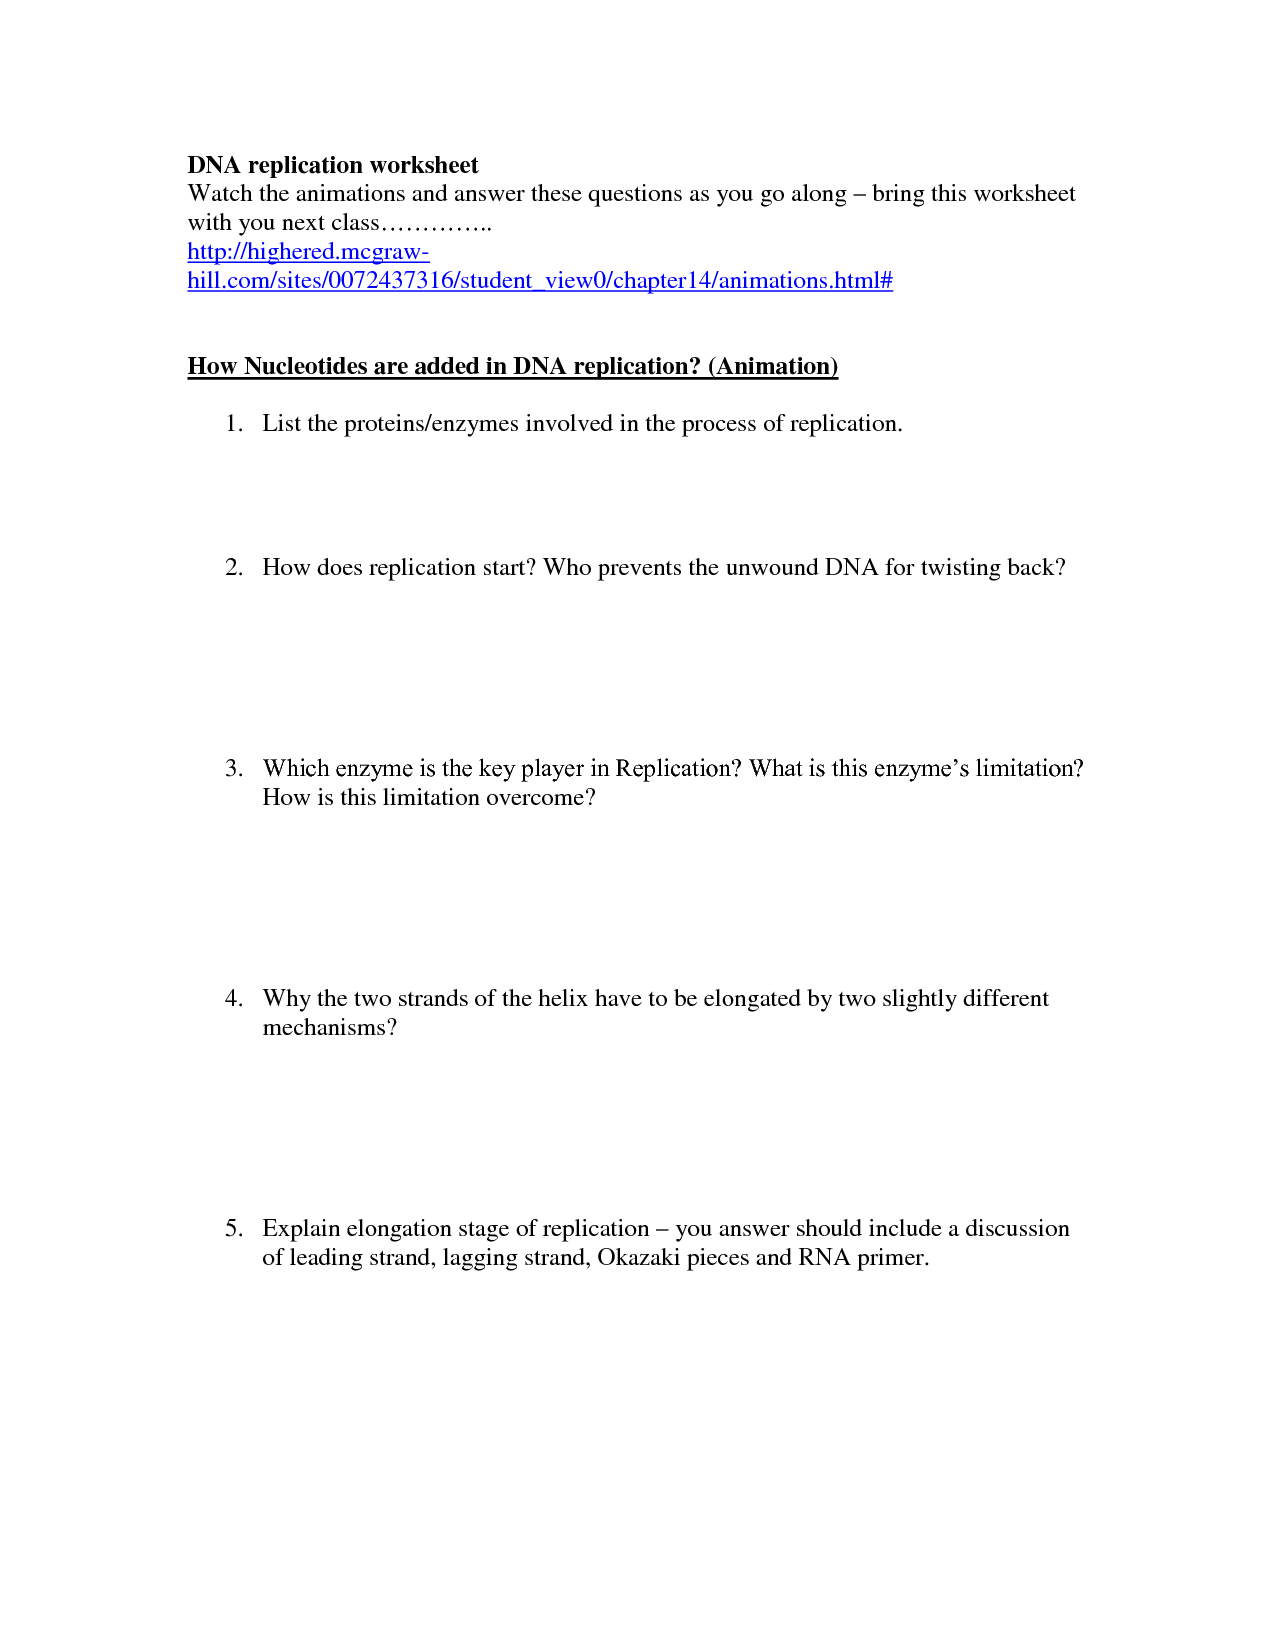 DNA Replication Worksheet Answers Image